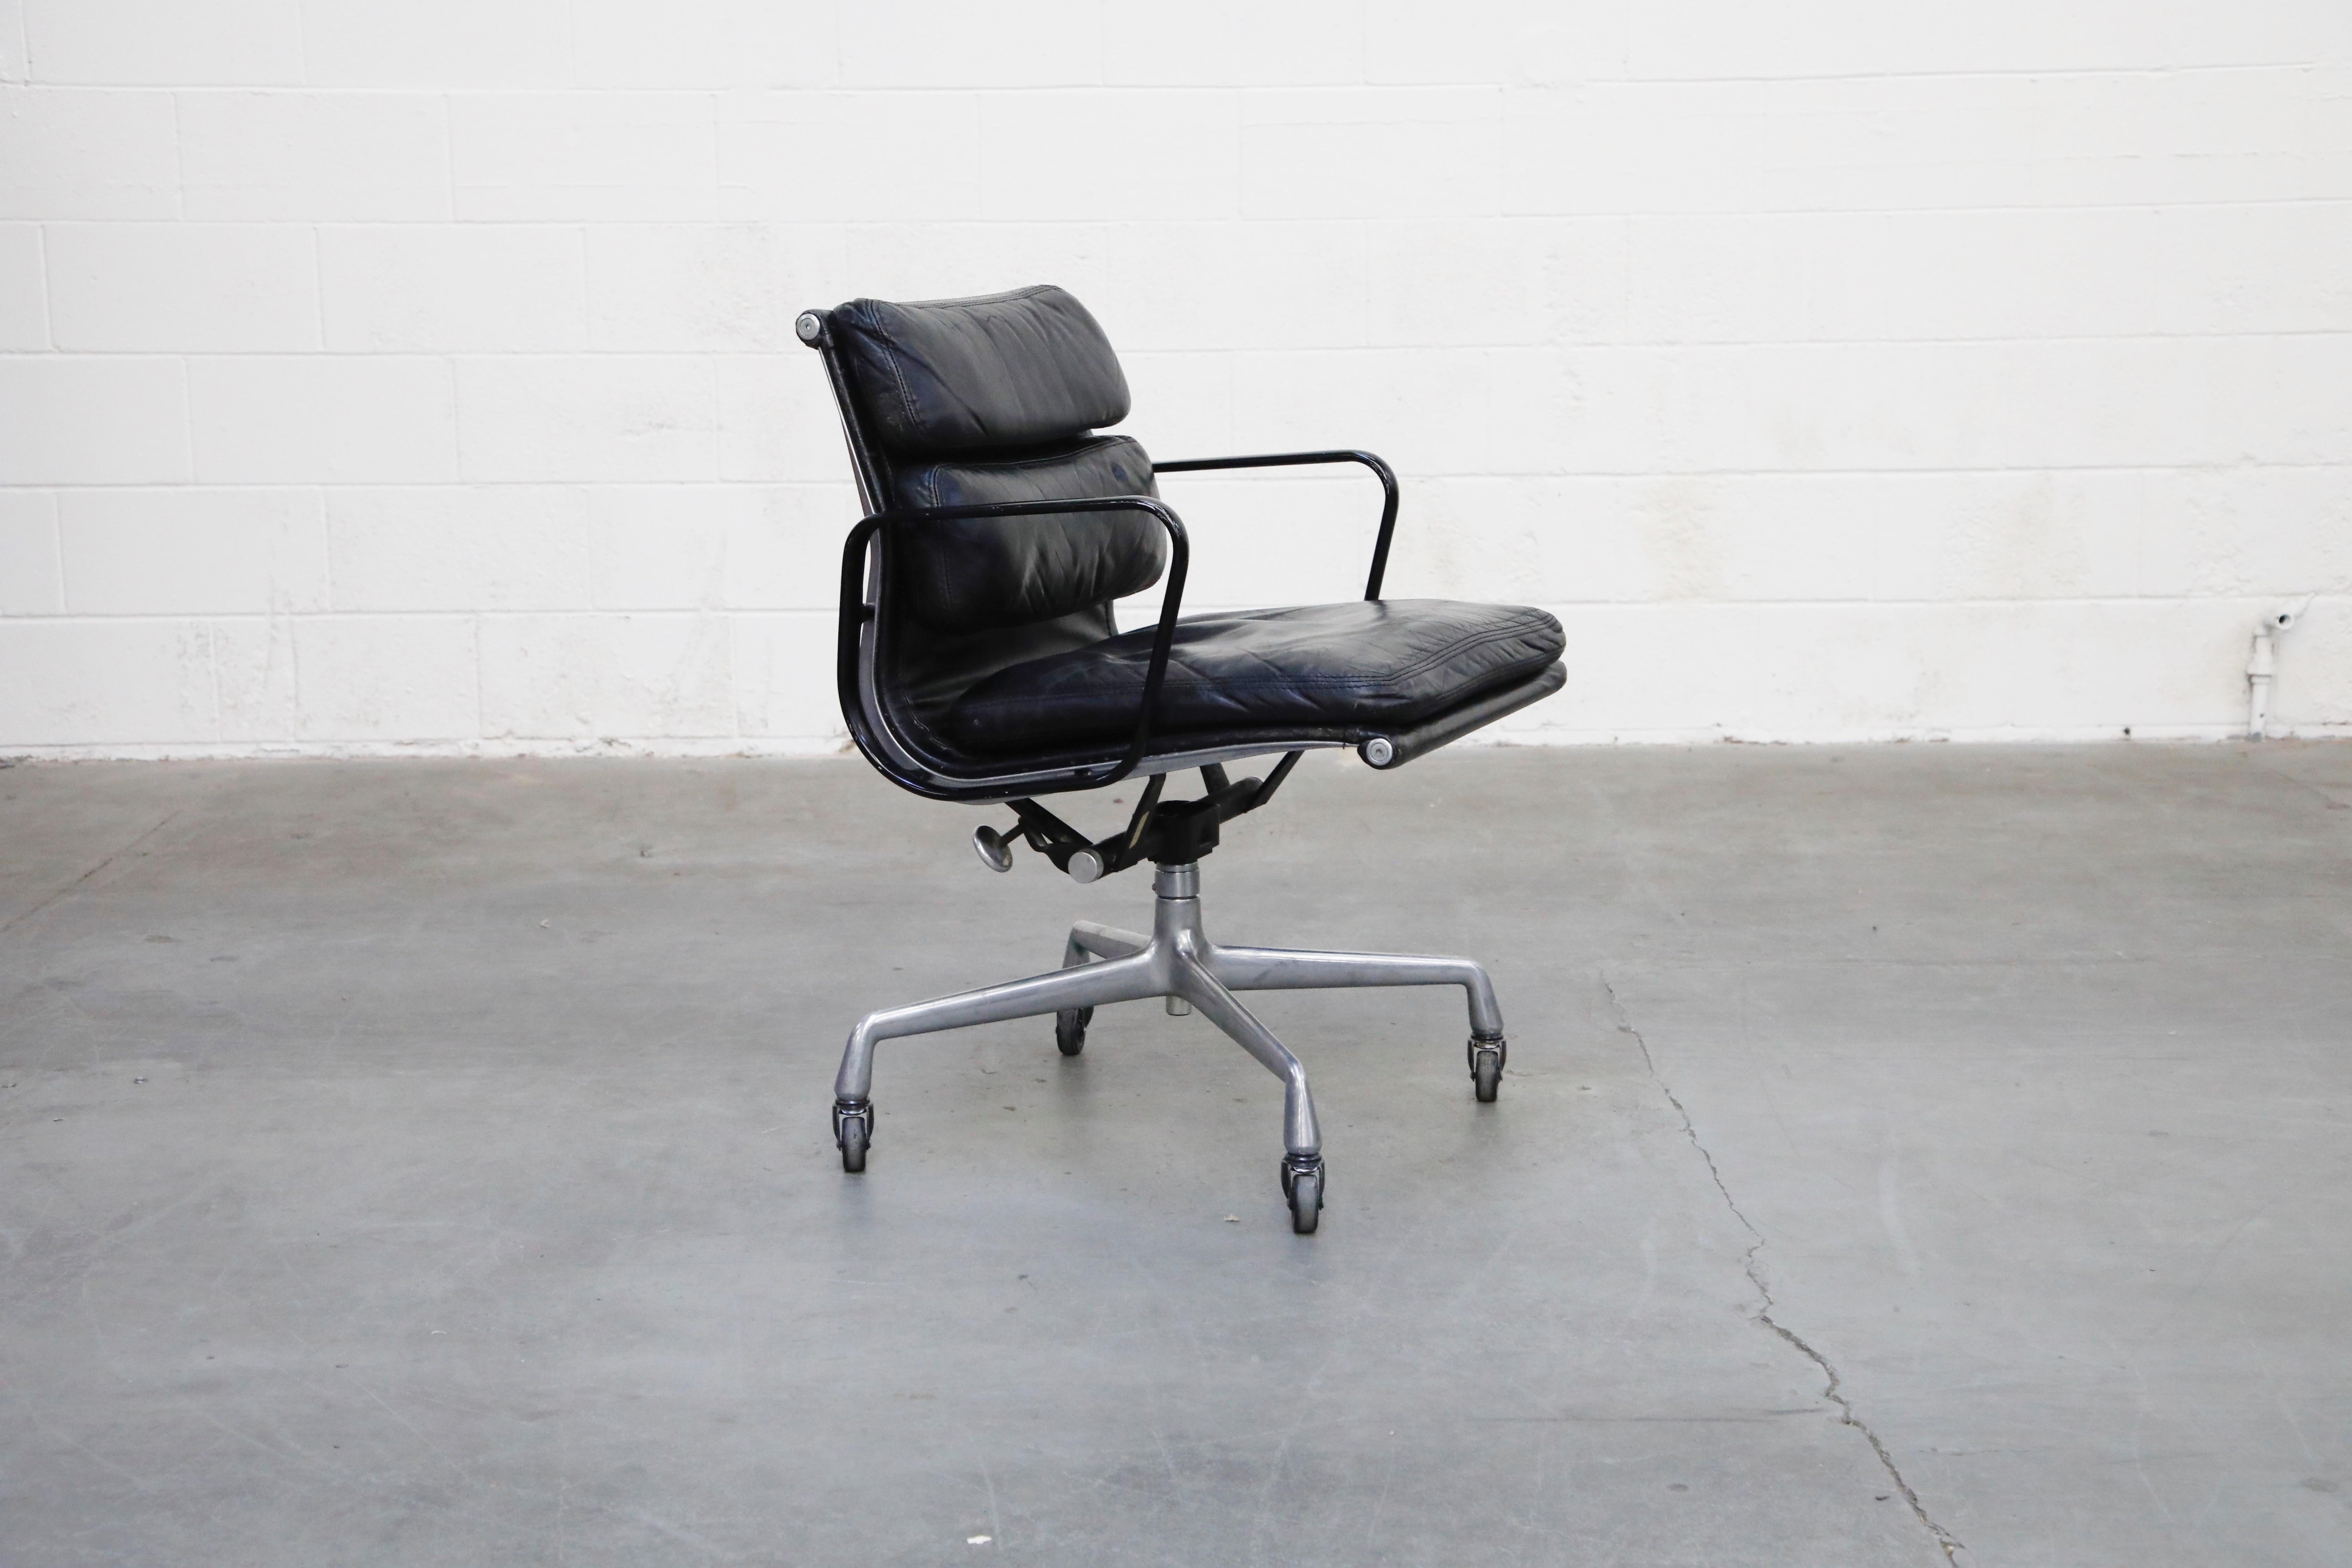 American Rare Early Production Eames Soft Pad Chair by Herman Miller, Signed & Dated 1976